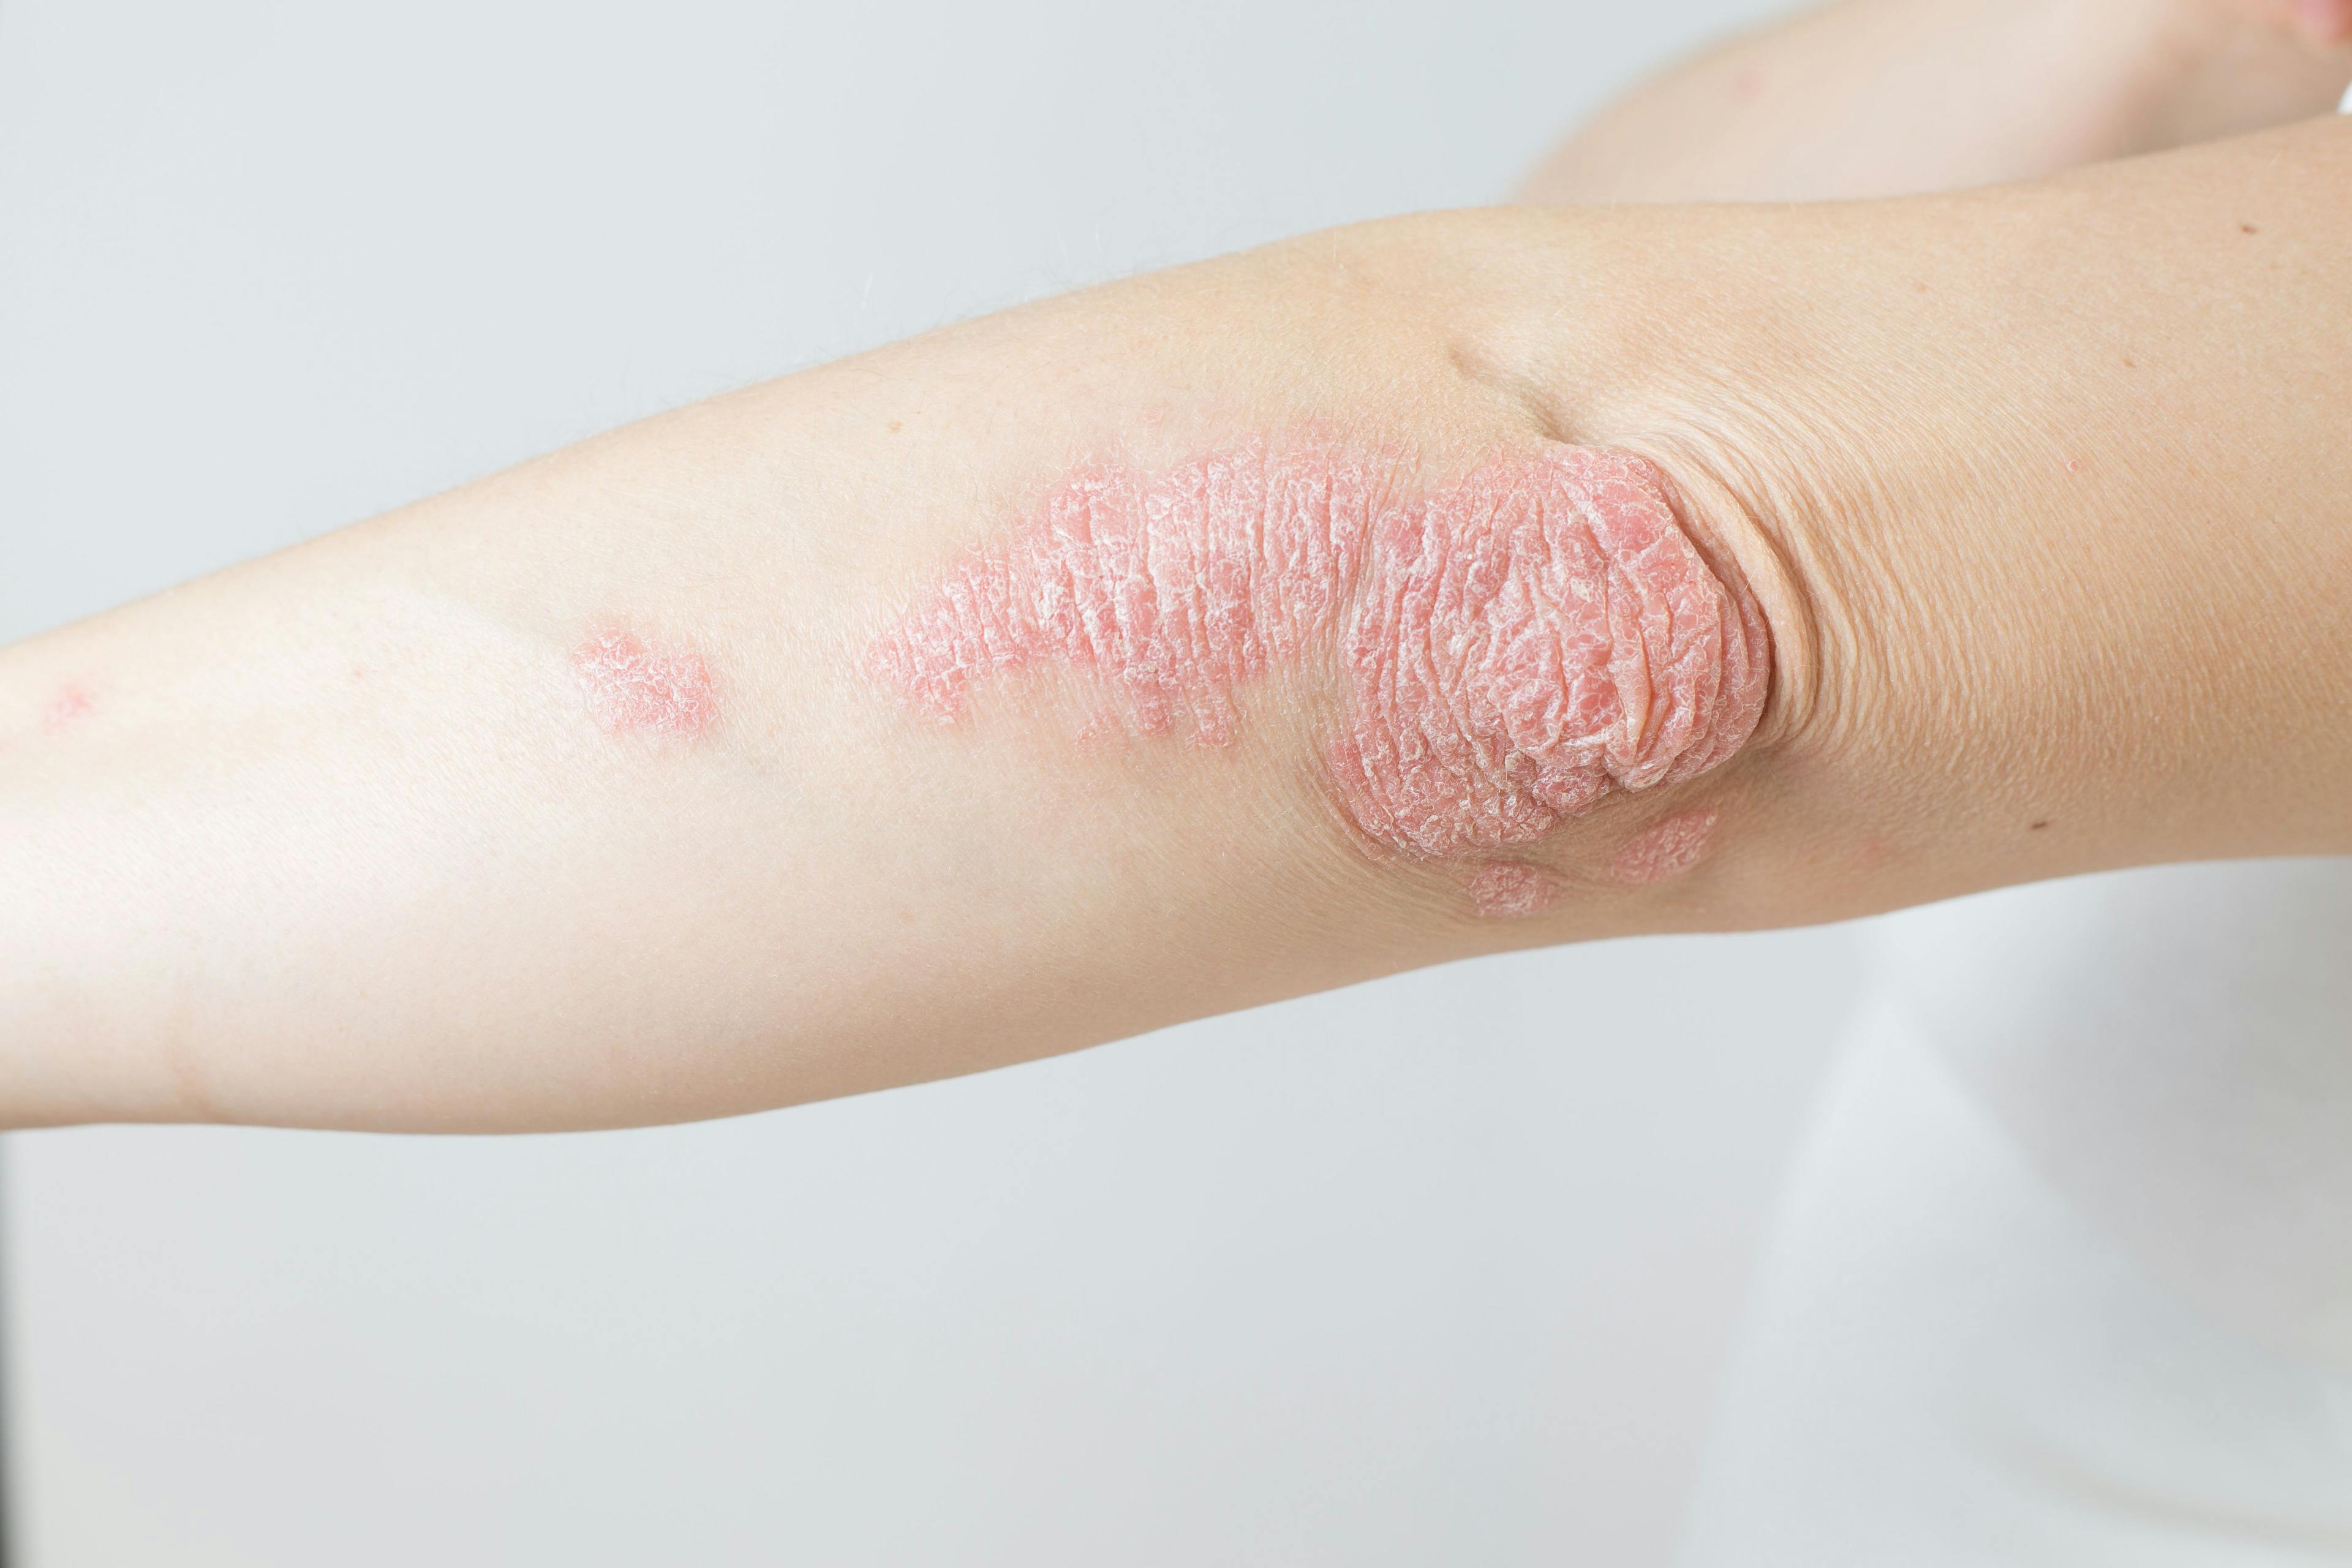 Pure Hypercholesterolemia and Psoriasis Share a Causal Link, Study Says